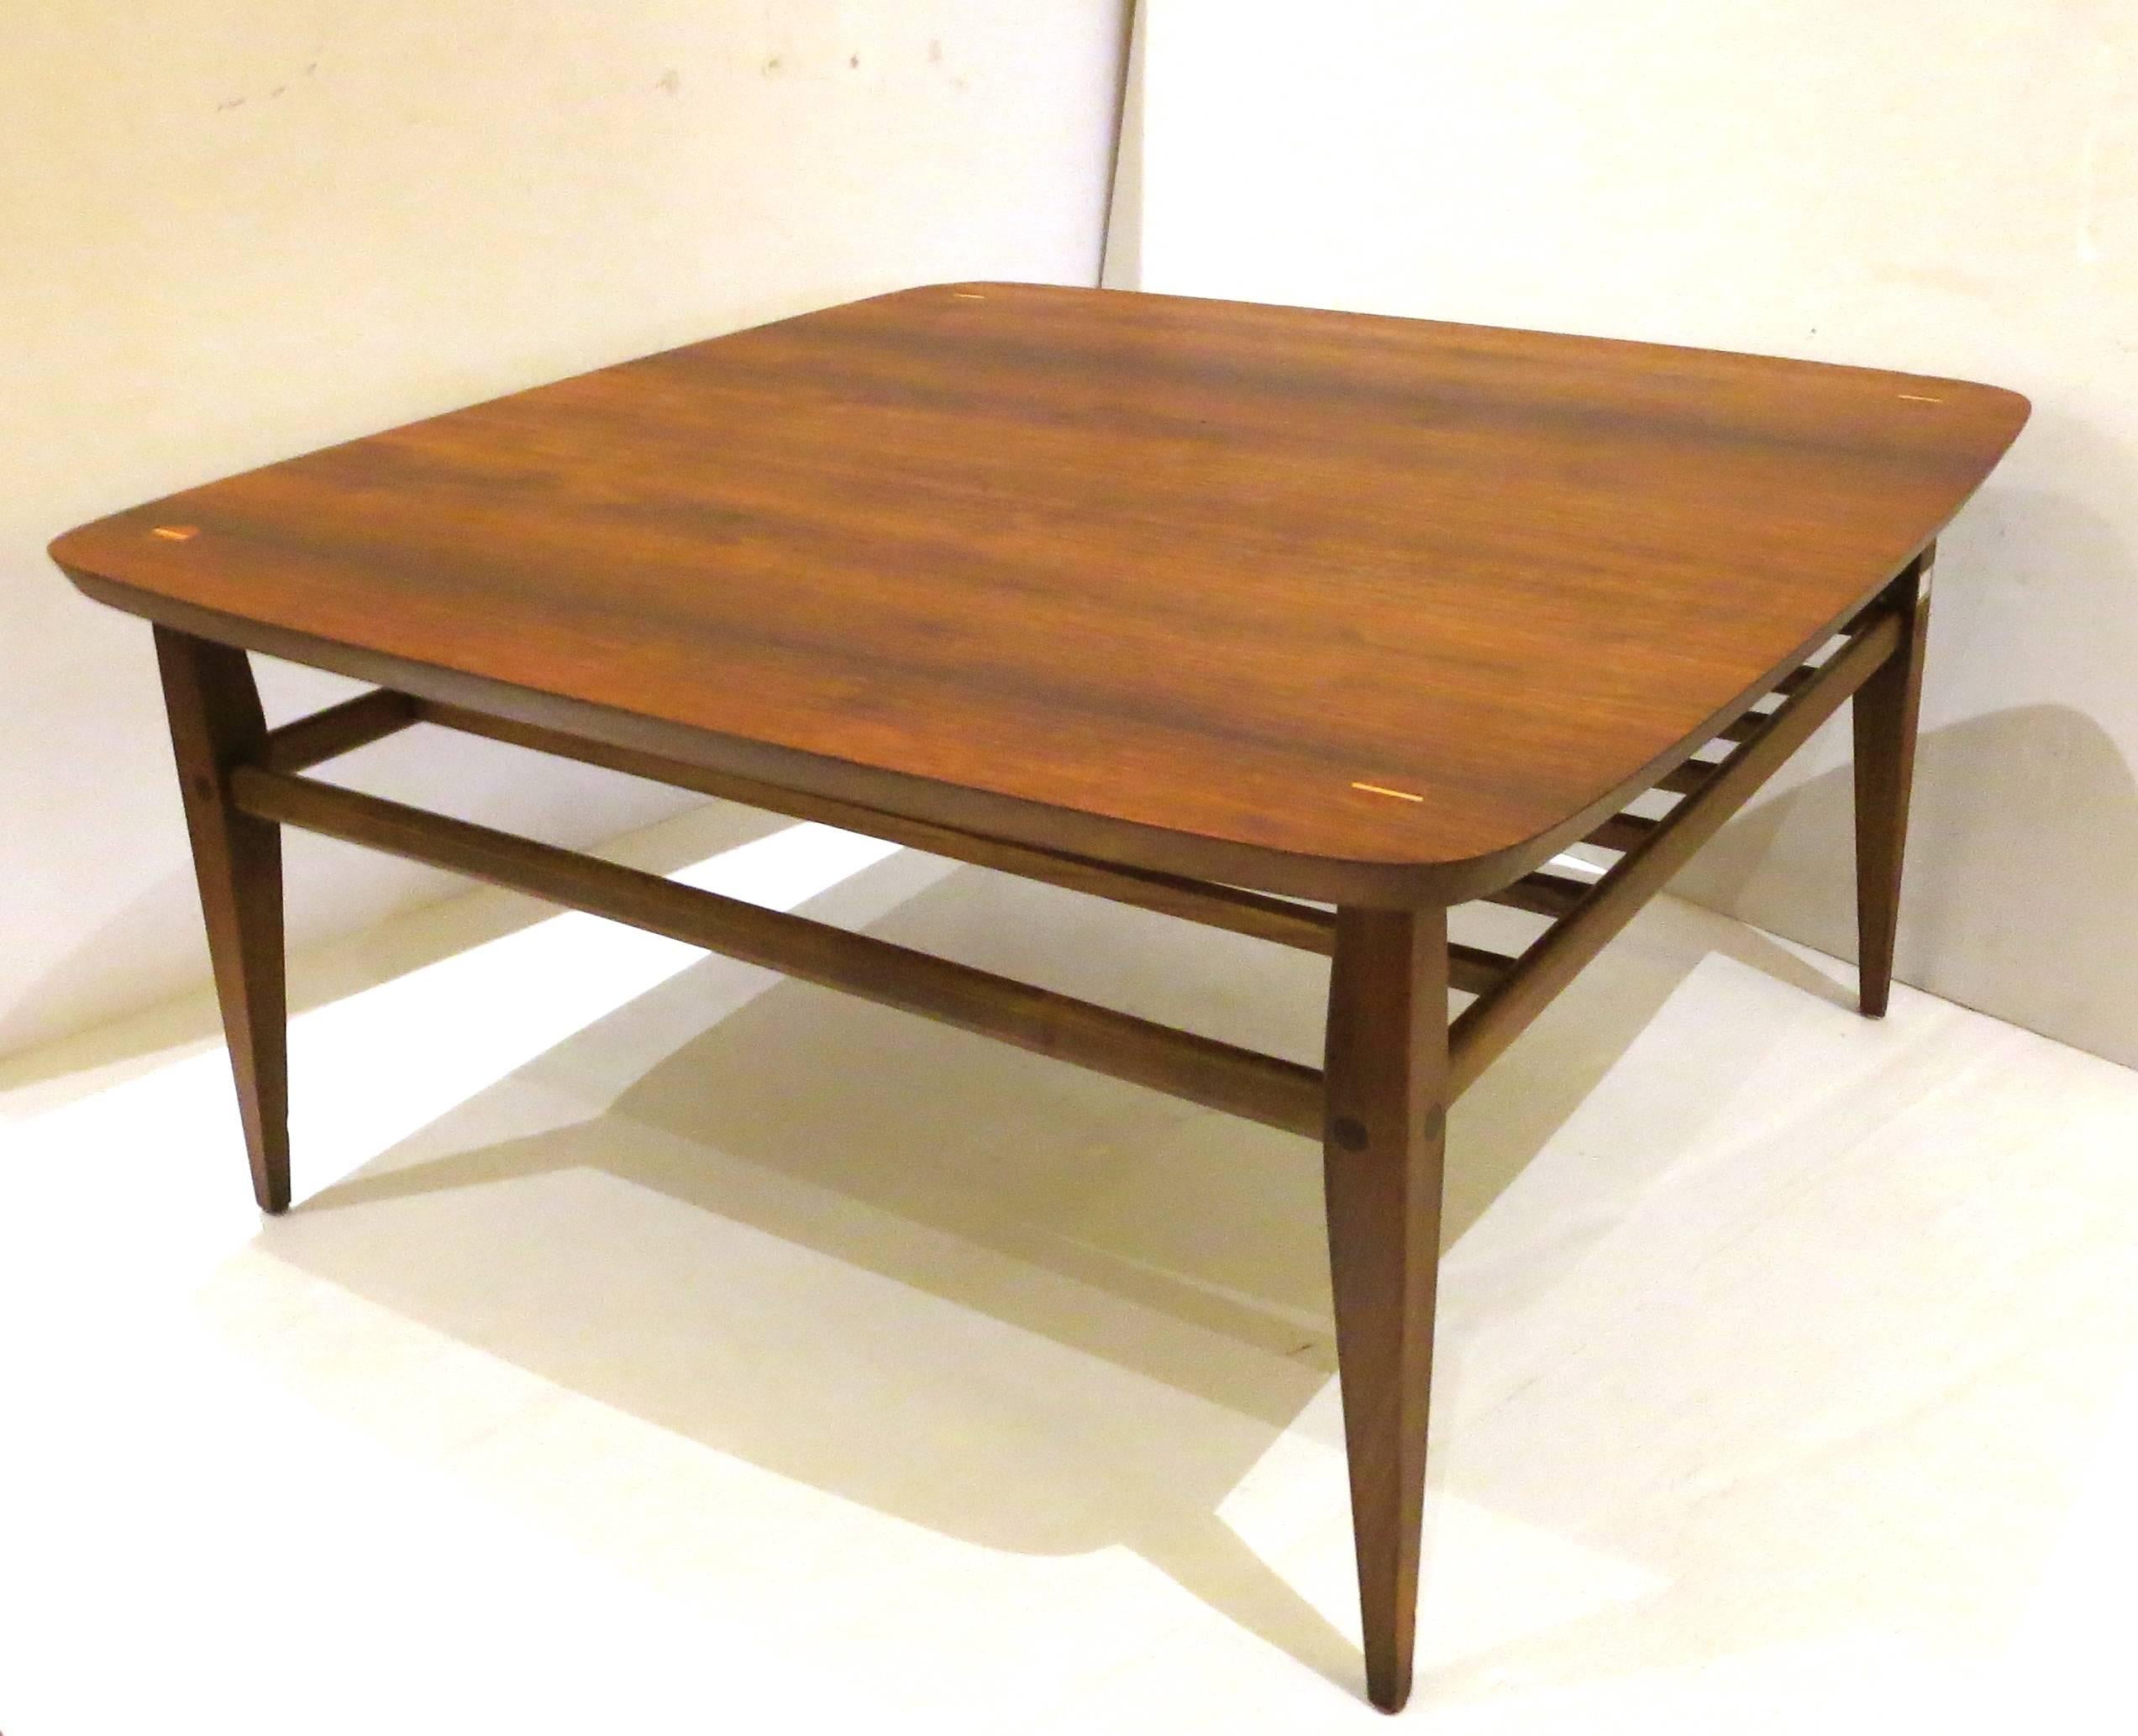 Striking beautiful walnut square coffee table with rounded corners and inlaid decorations on the top, the table circa 1960s the top has been refinished and left its hand rubbed oil finish, the base its solid and sturdy and very nice and clean